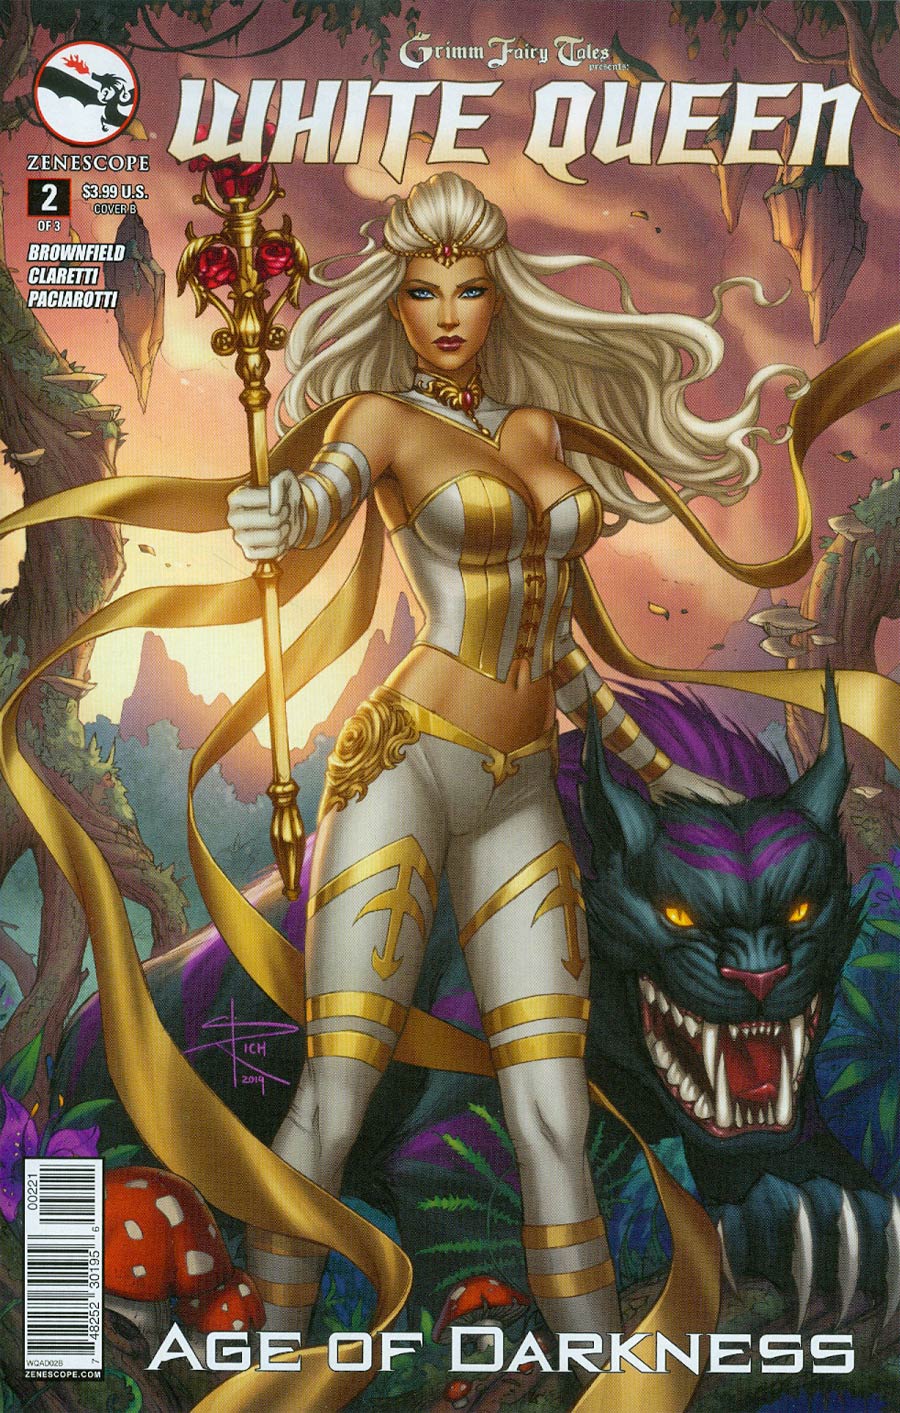 Grimm Fairy Tales Presents White Queen #2 Cover B Sabine Rich (Age Of Darkness Tie-In)